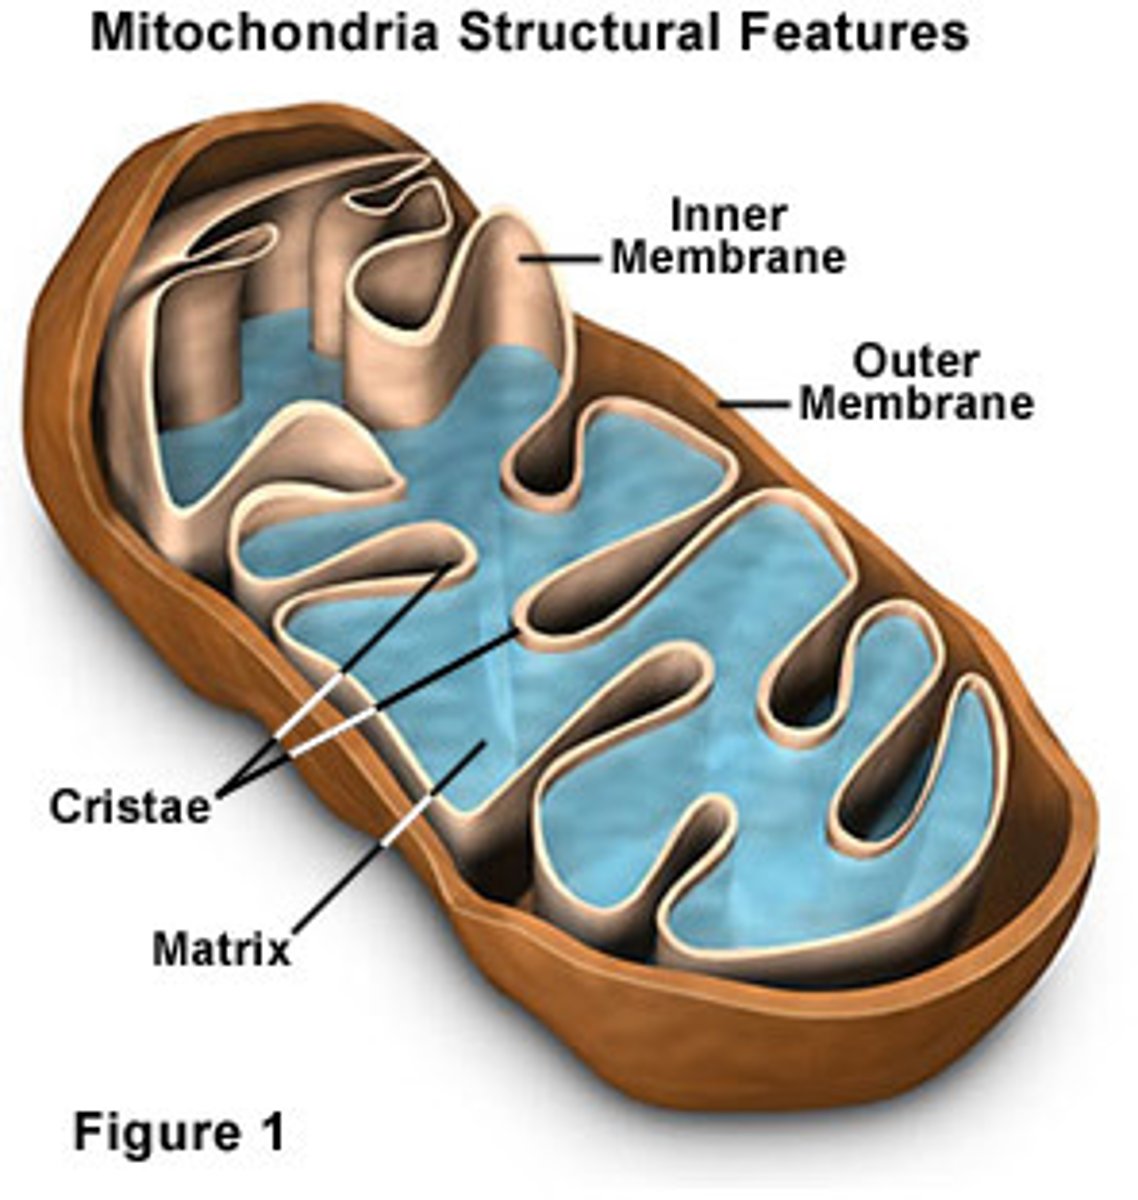 <p>- organelle that is the site of ATP (energy) production. <br><br>- purpose of folded inner membrane: increases surface area for chemical reactions</p>